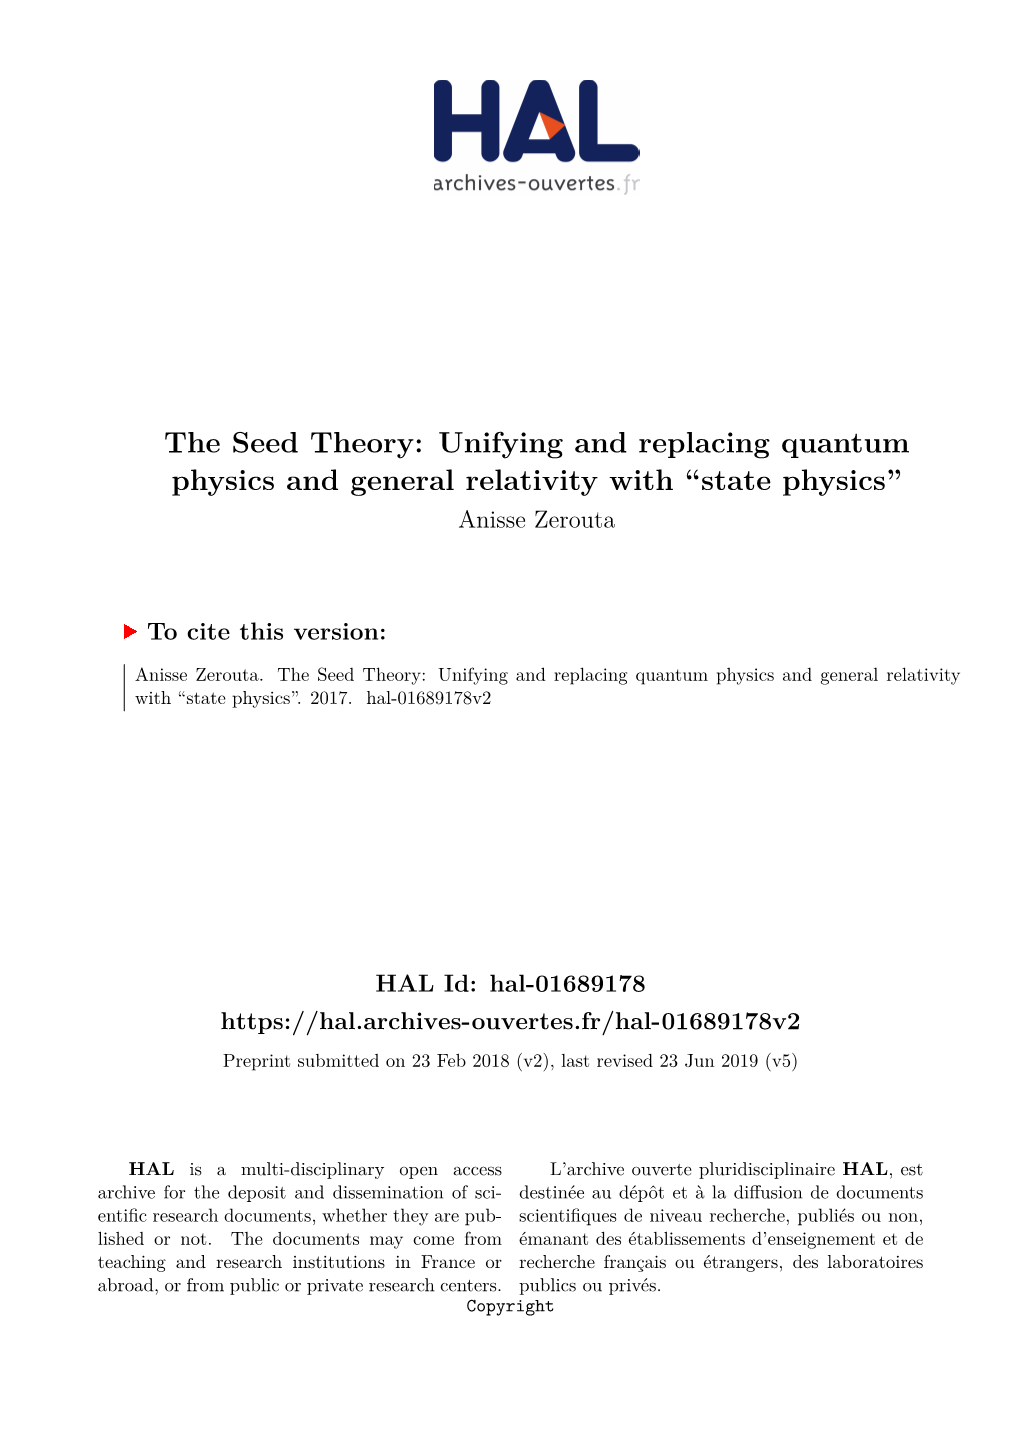 The Seed Theory: Unifying and Replacing Quantum Physics and General Relativity with “State Physics” Anisse Zerouta